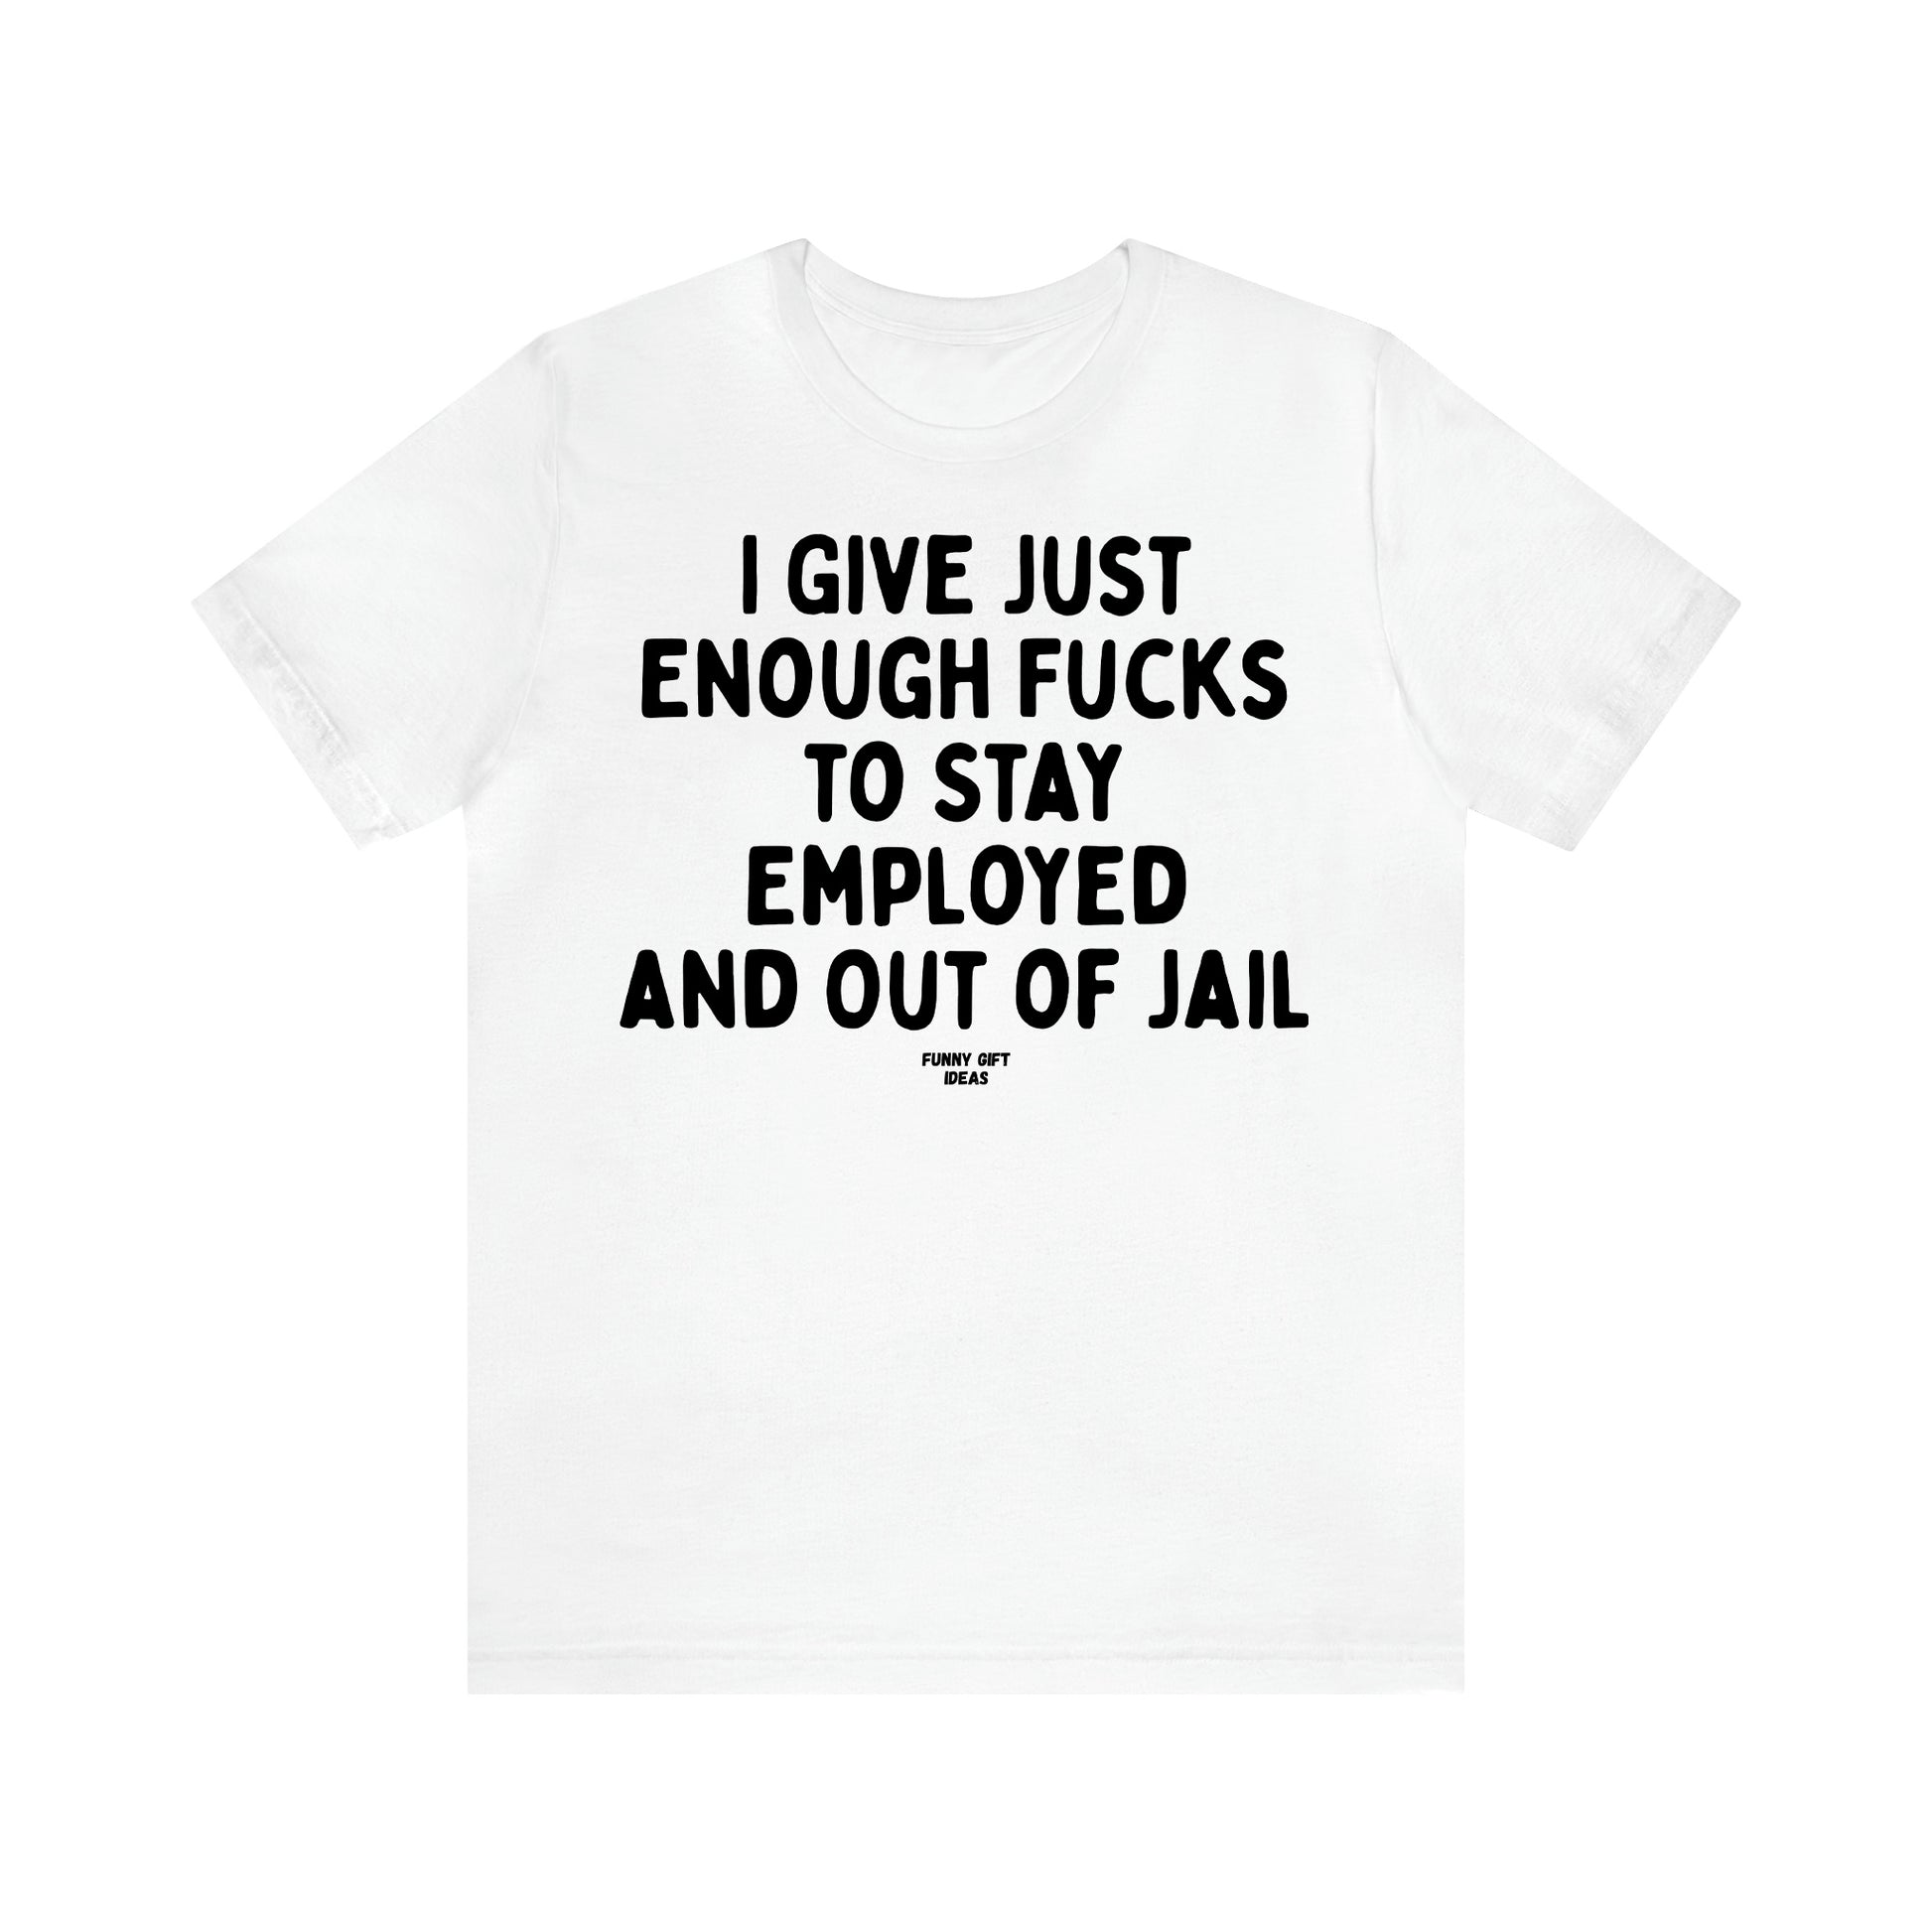 Women's T Shirts I Give Just Enough Fucks to Stay Employed and Out of Jail - Funny Gift Ideas